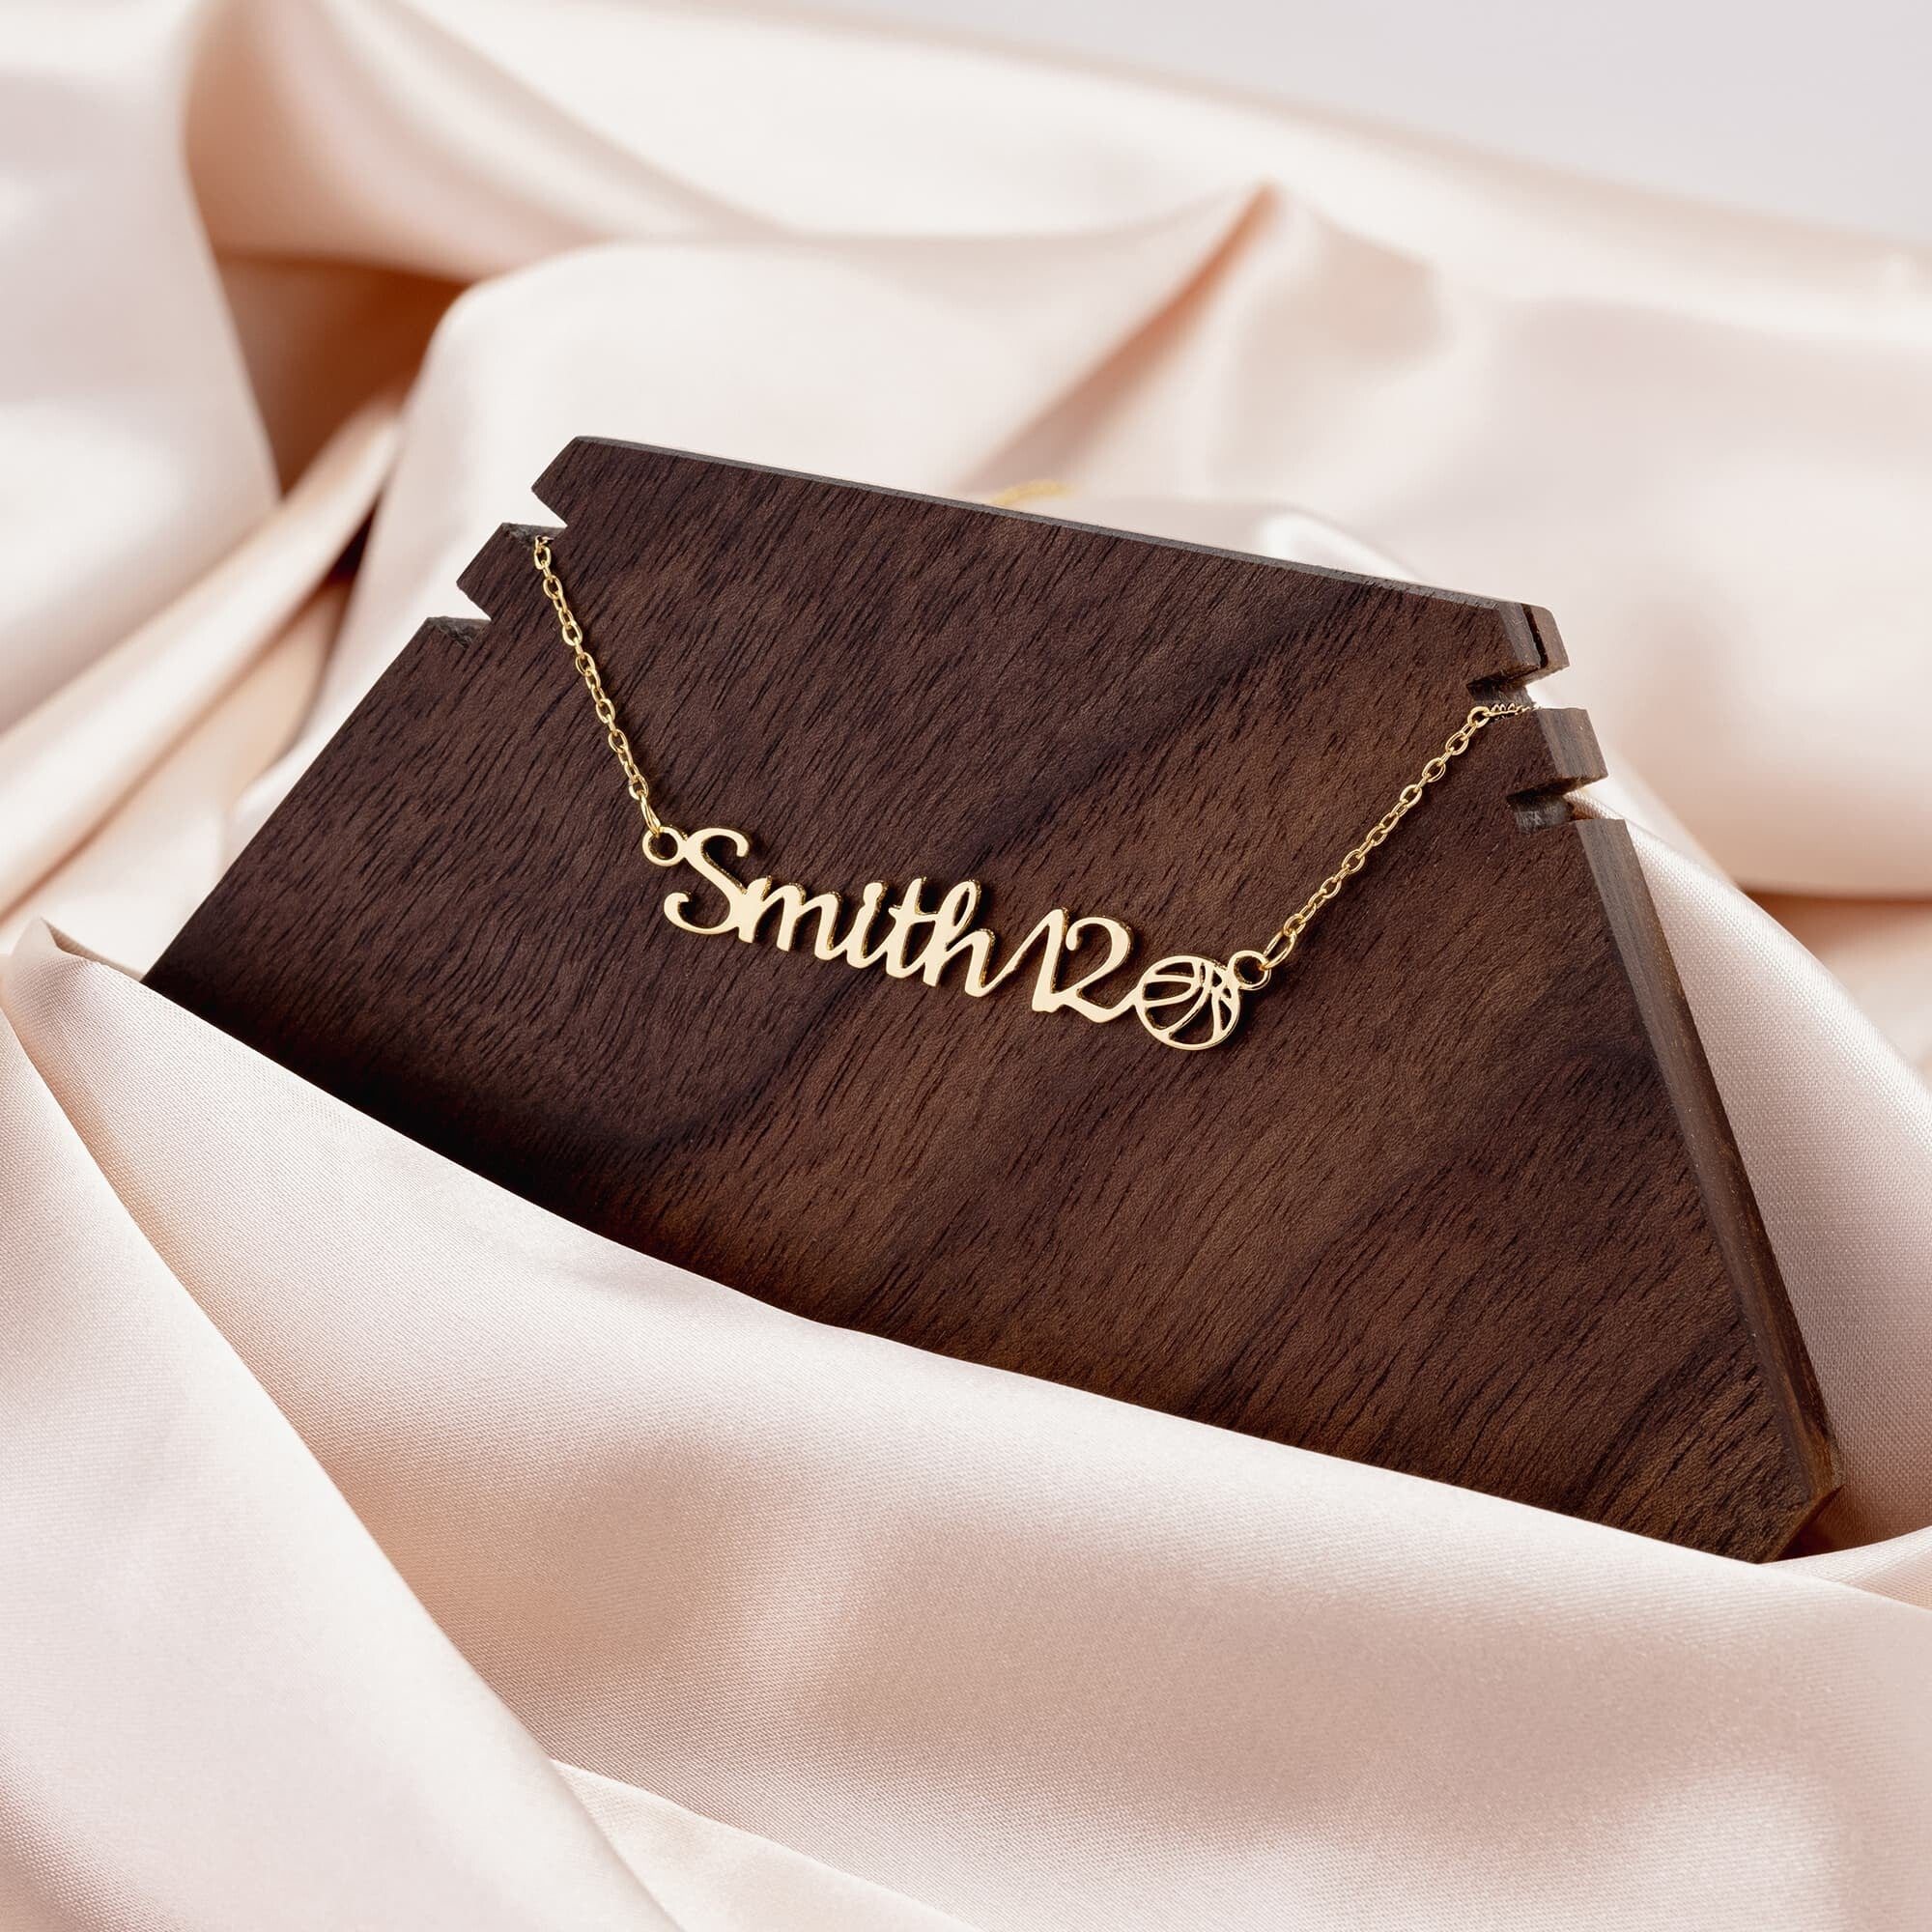 Personalized jewelry for her